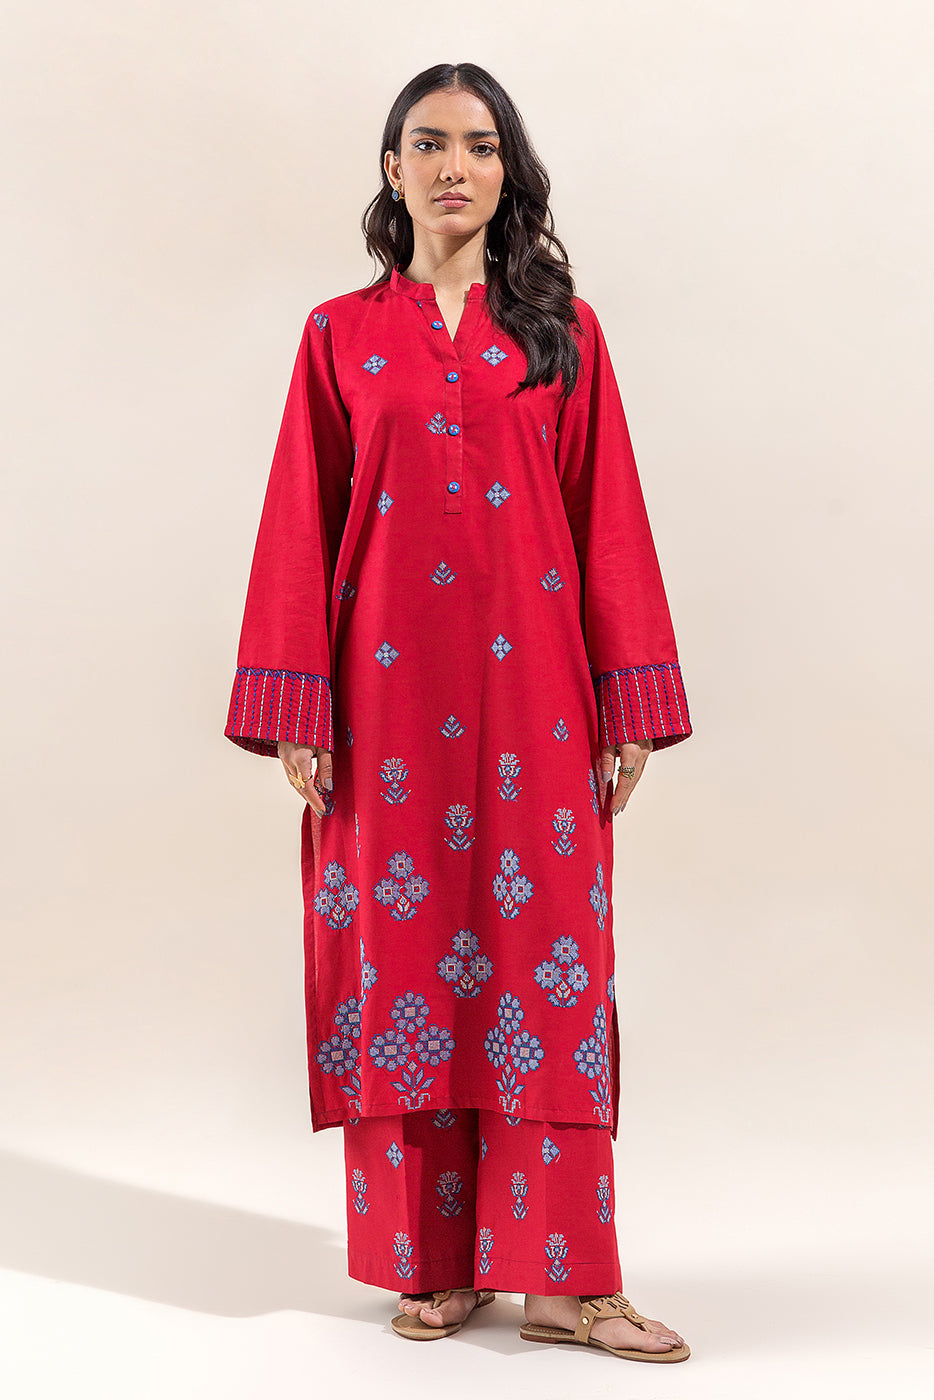 2 PIECE EMBROIDERED LAWN SUIT-RASPBERRY BLUSH (UNSTITCHED)